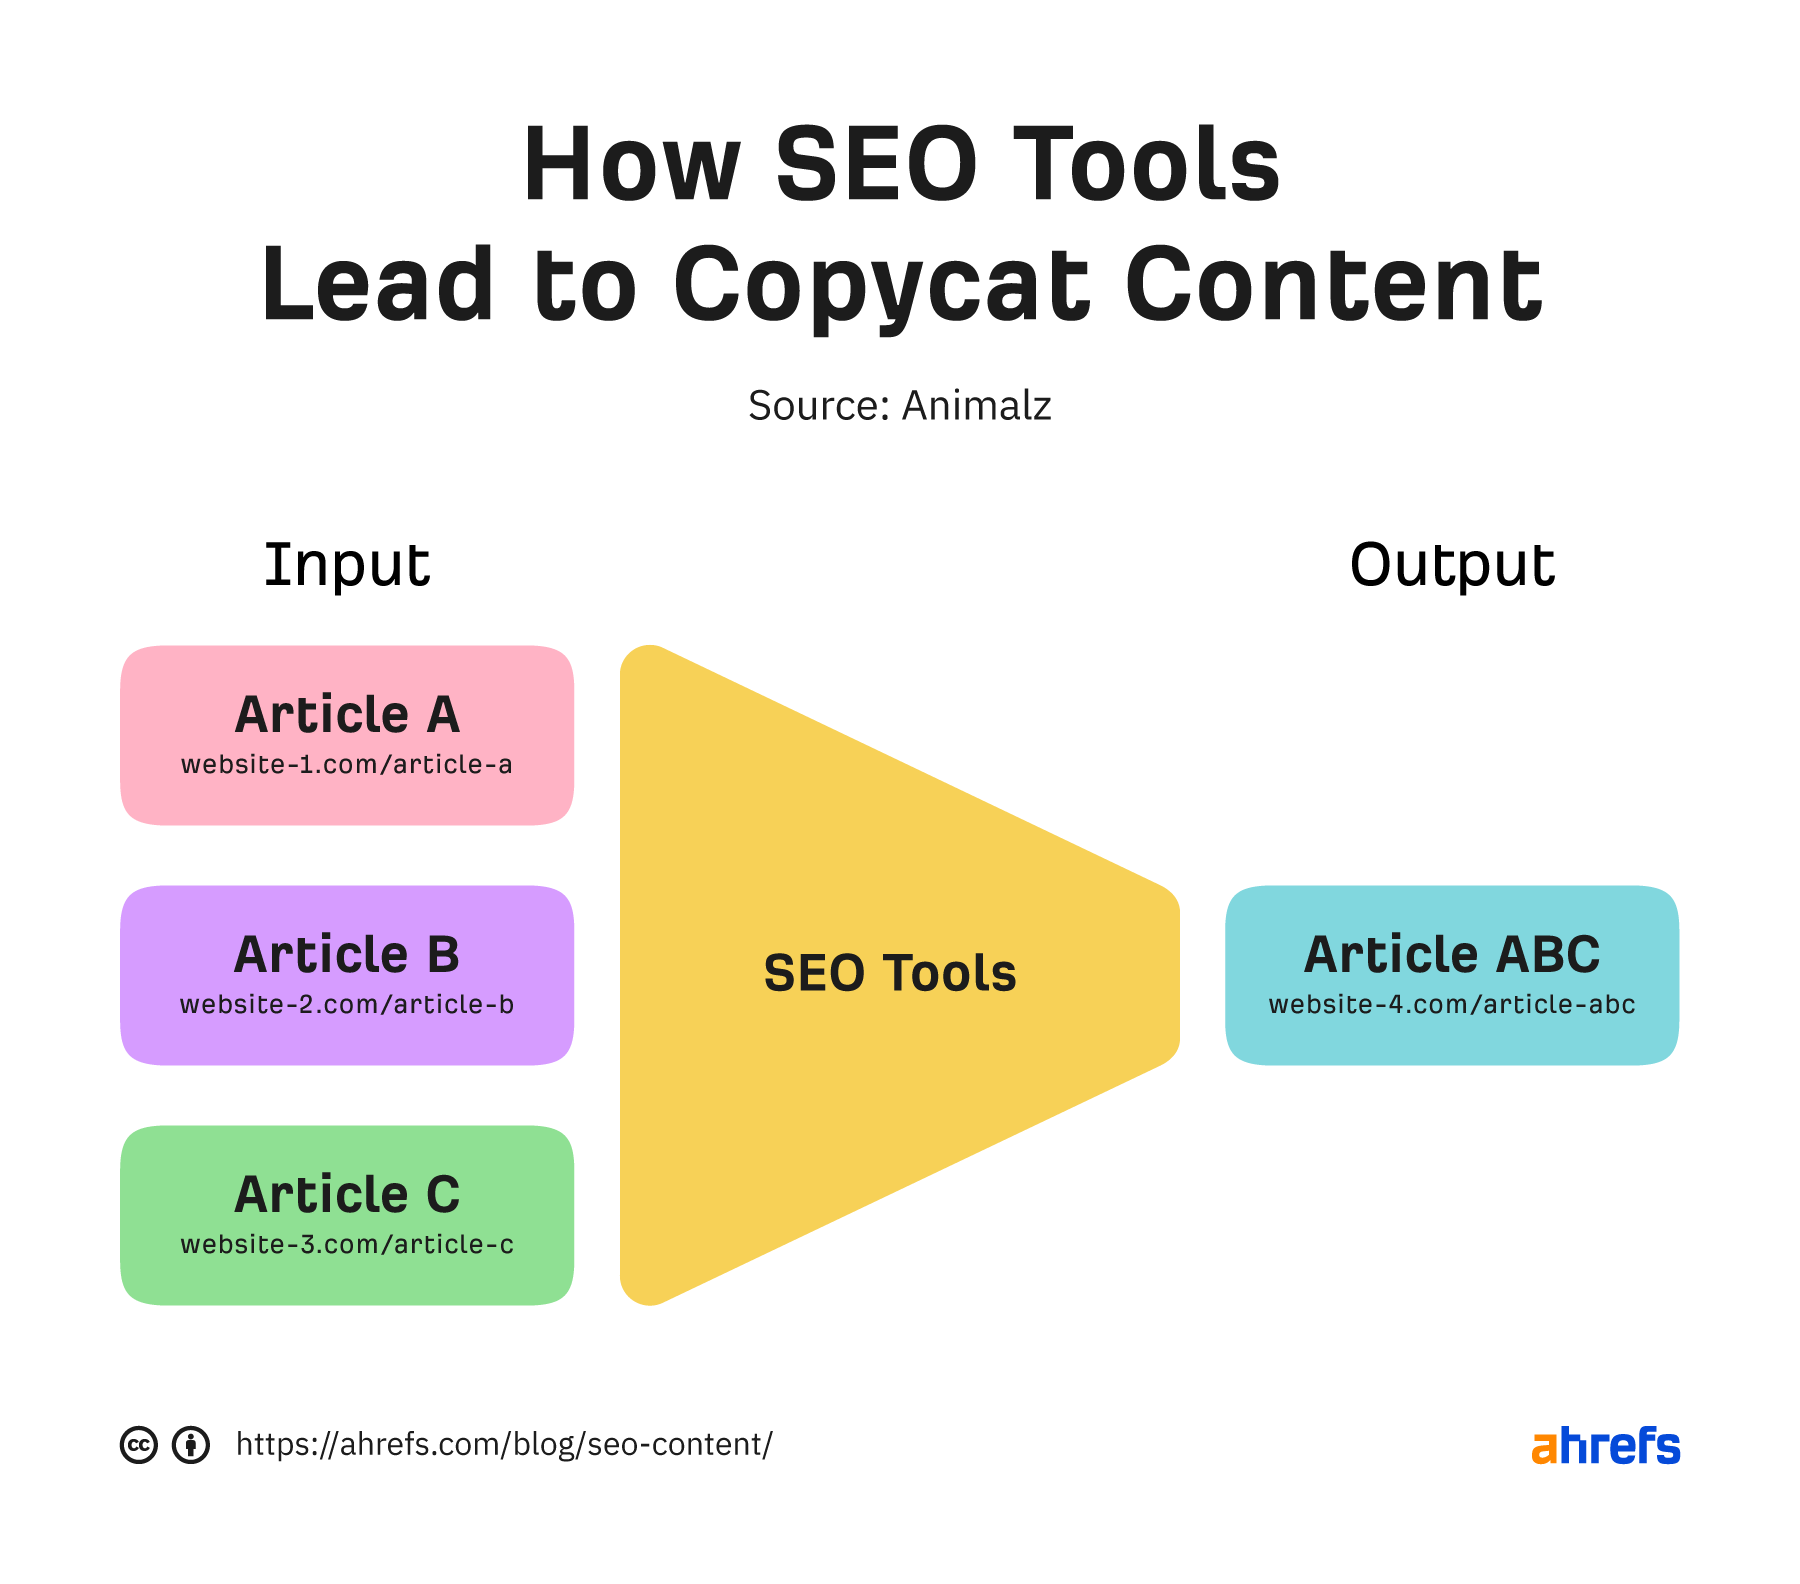 How SEO tools can lead to copycat content